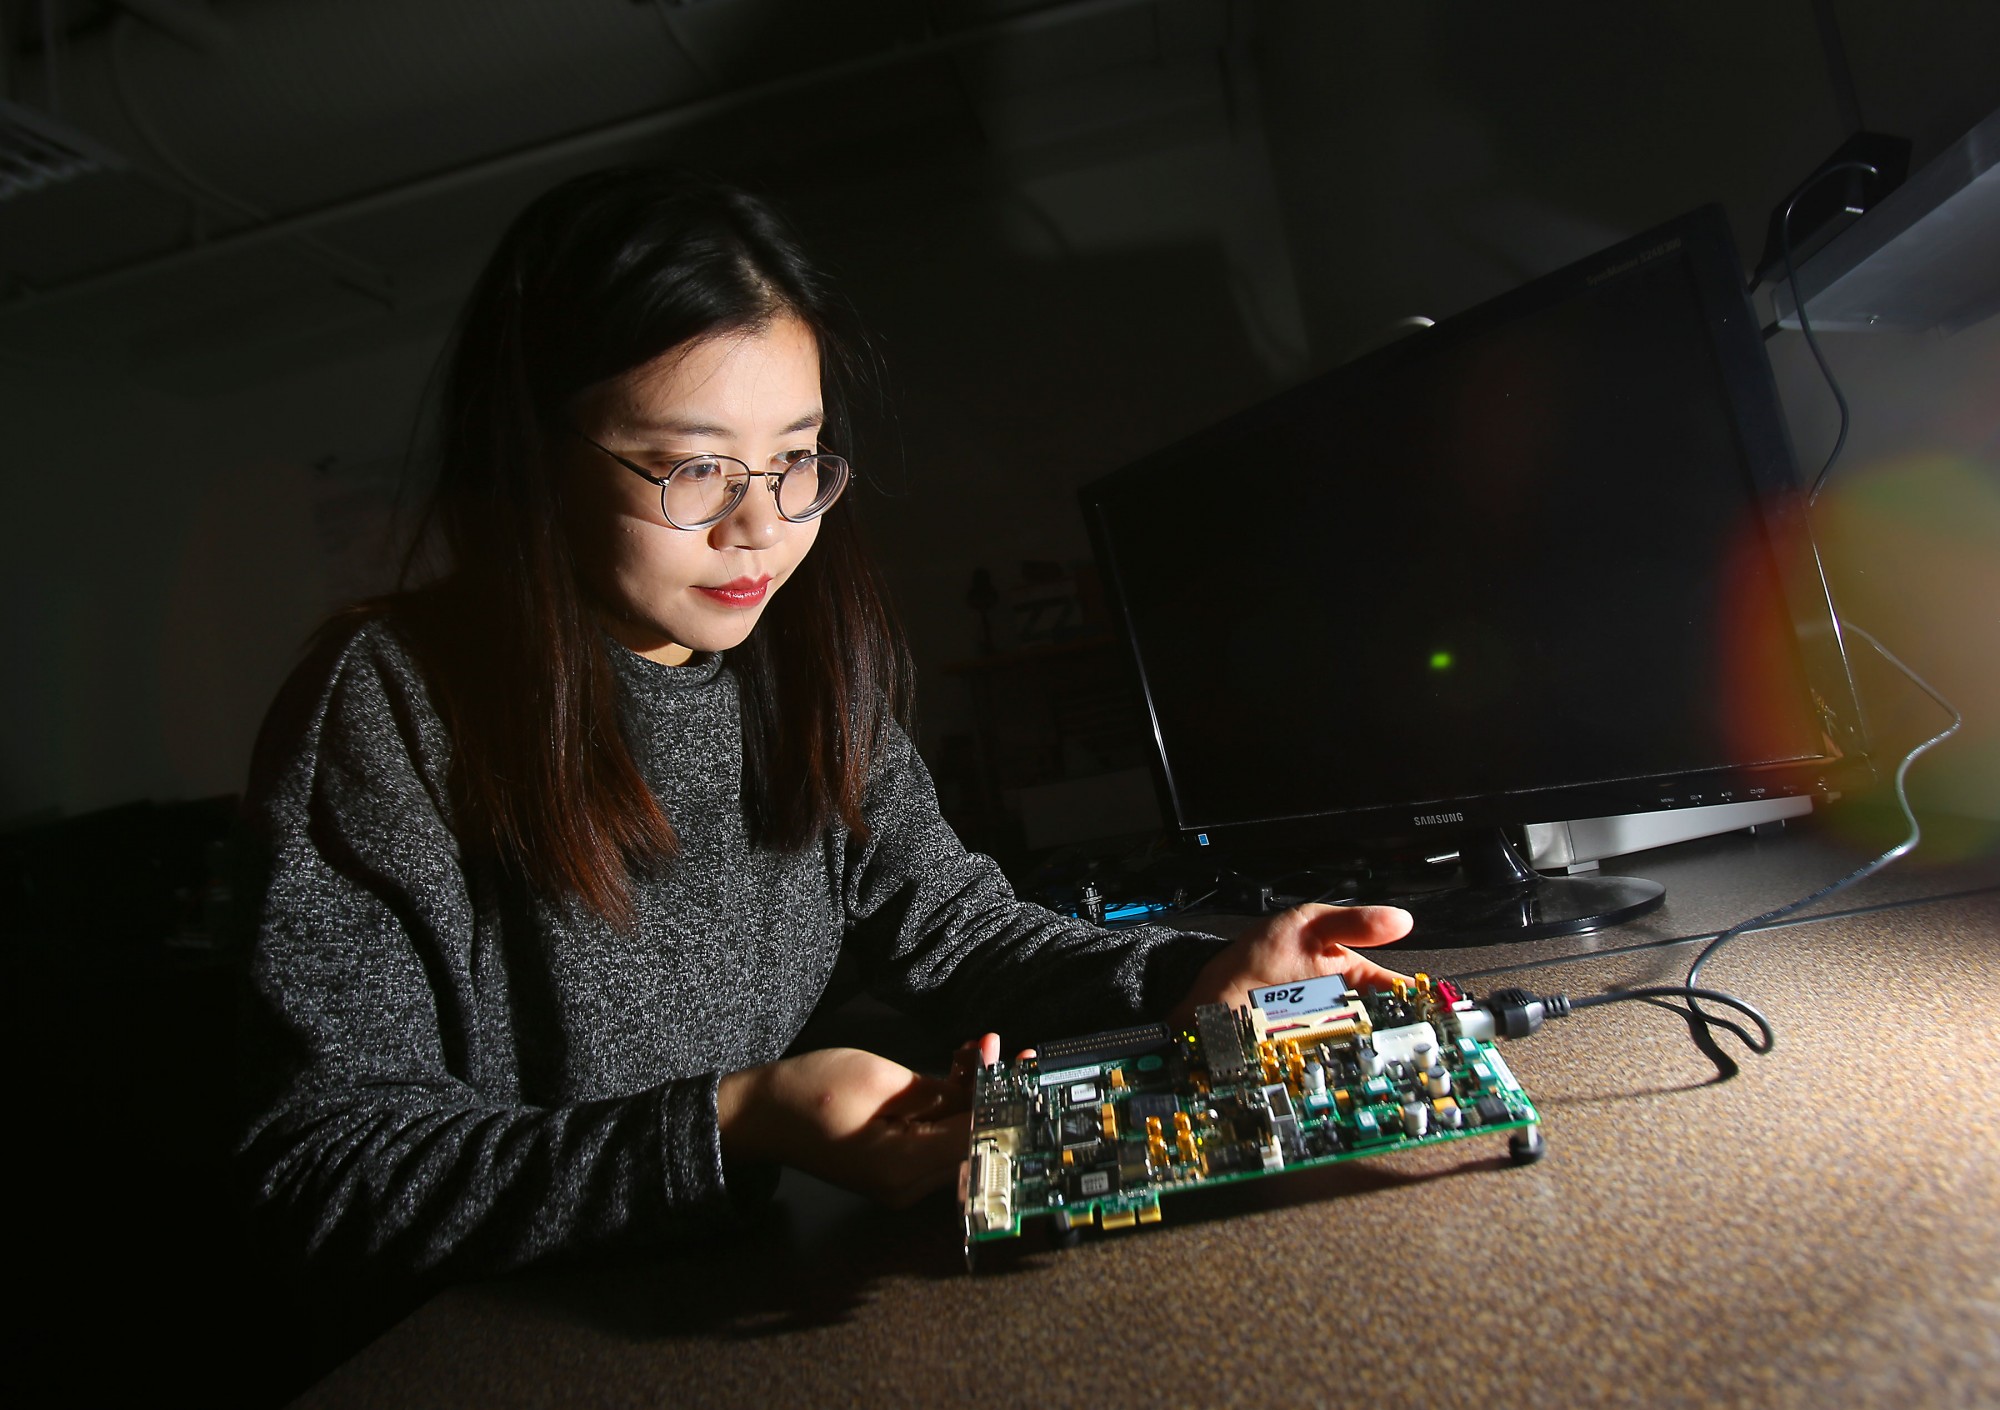 Meitong Pan, examines an FPGA board used to implement complex digital computations.